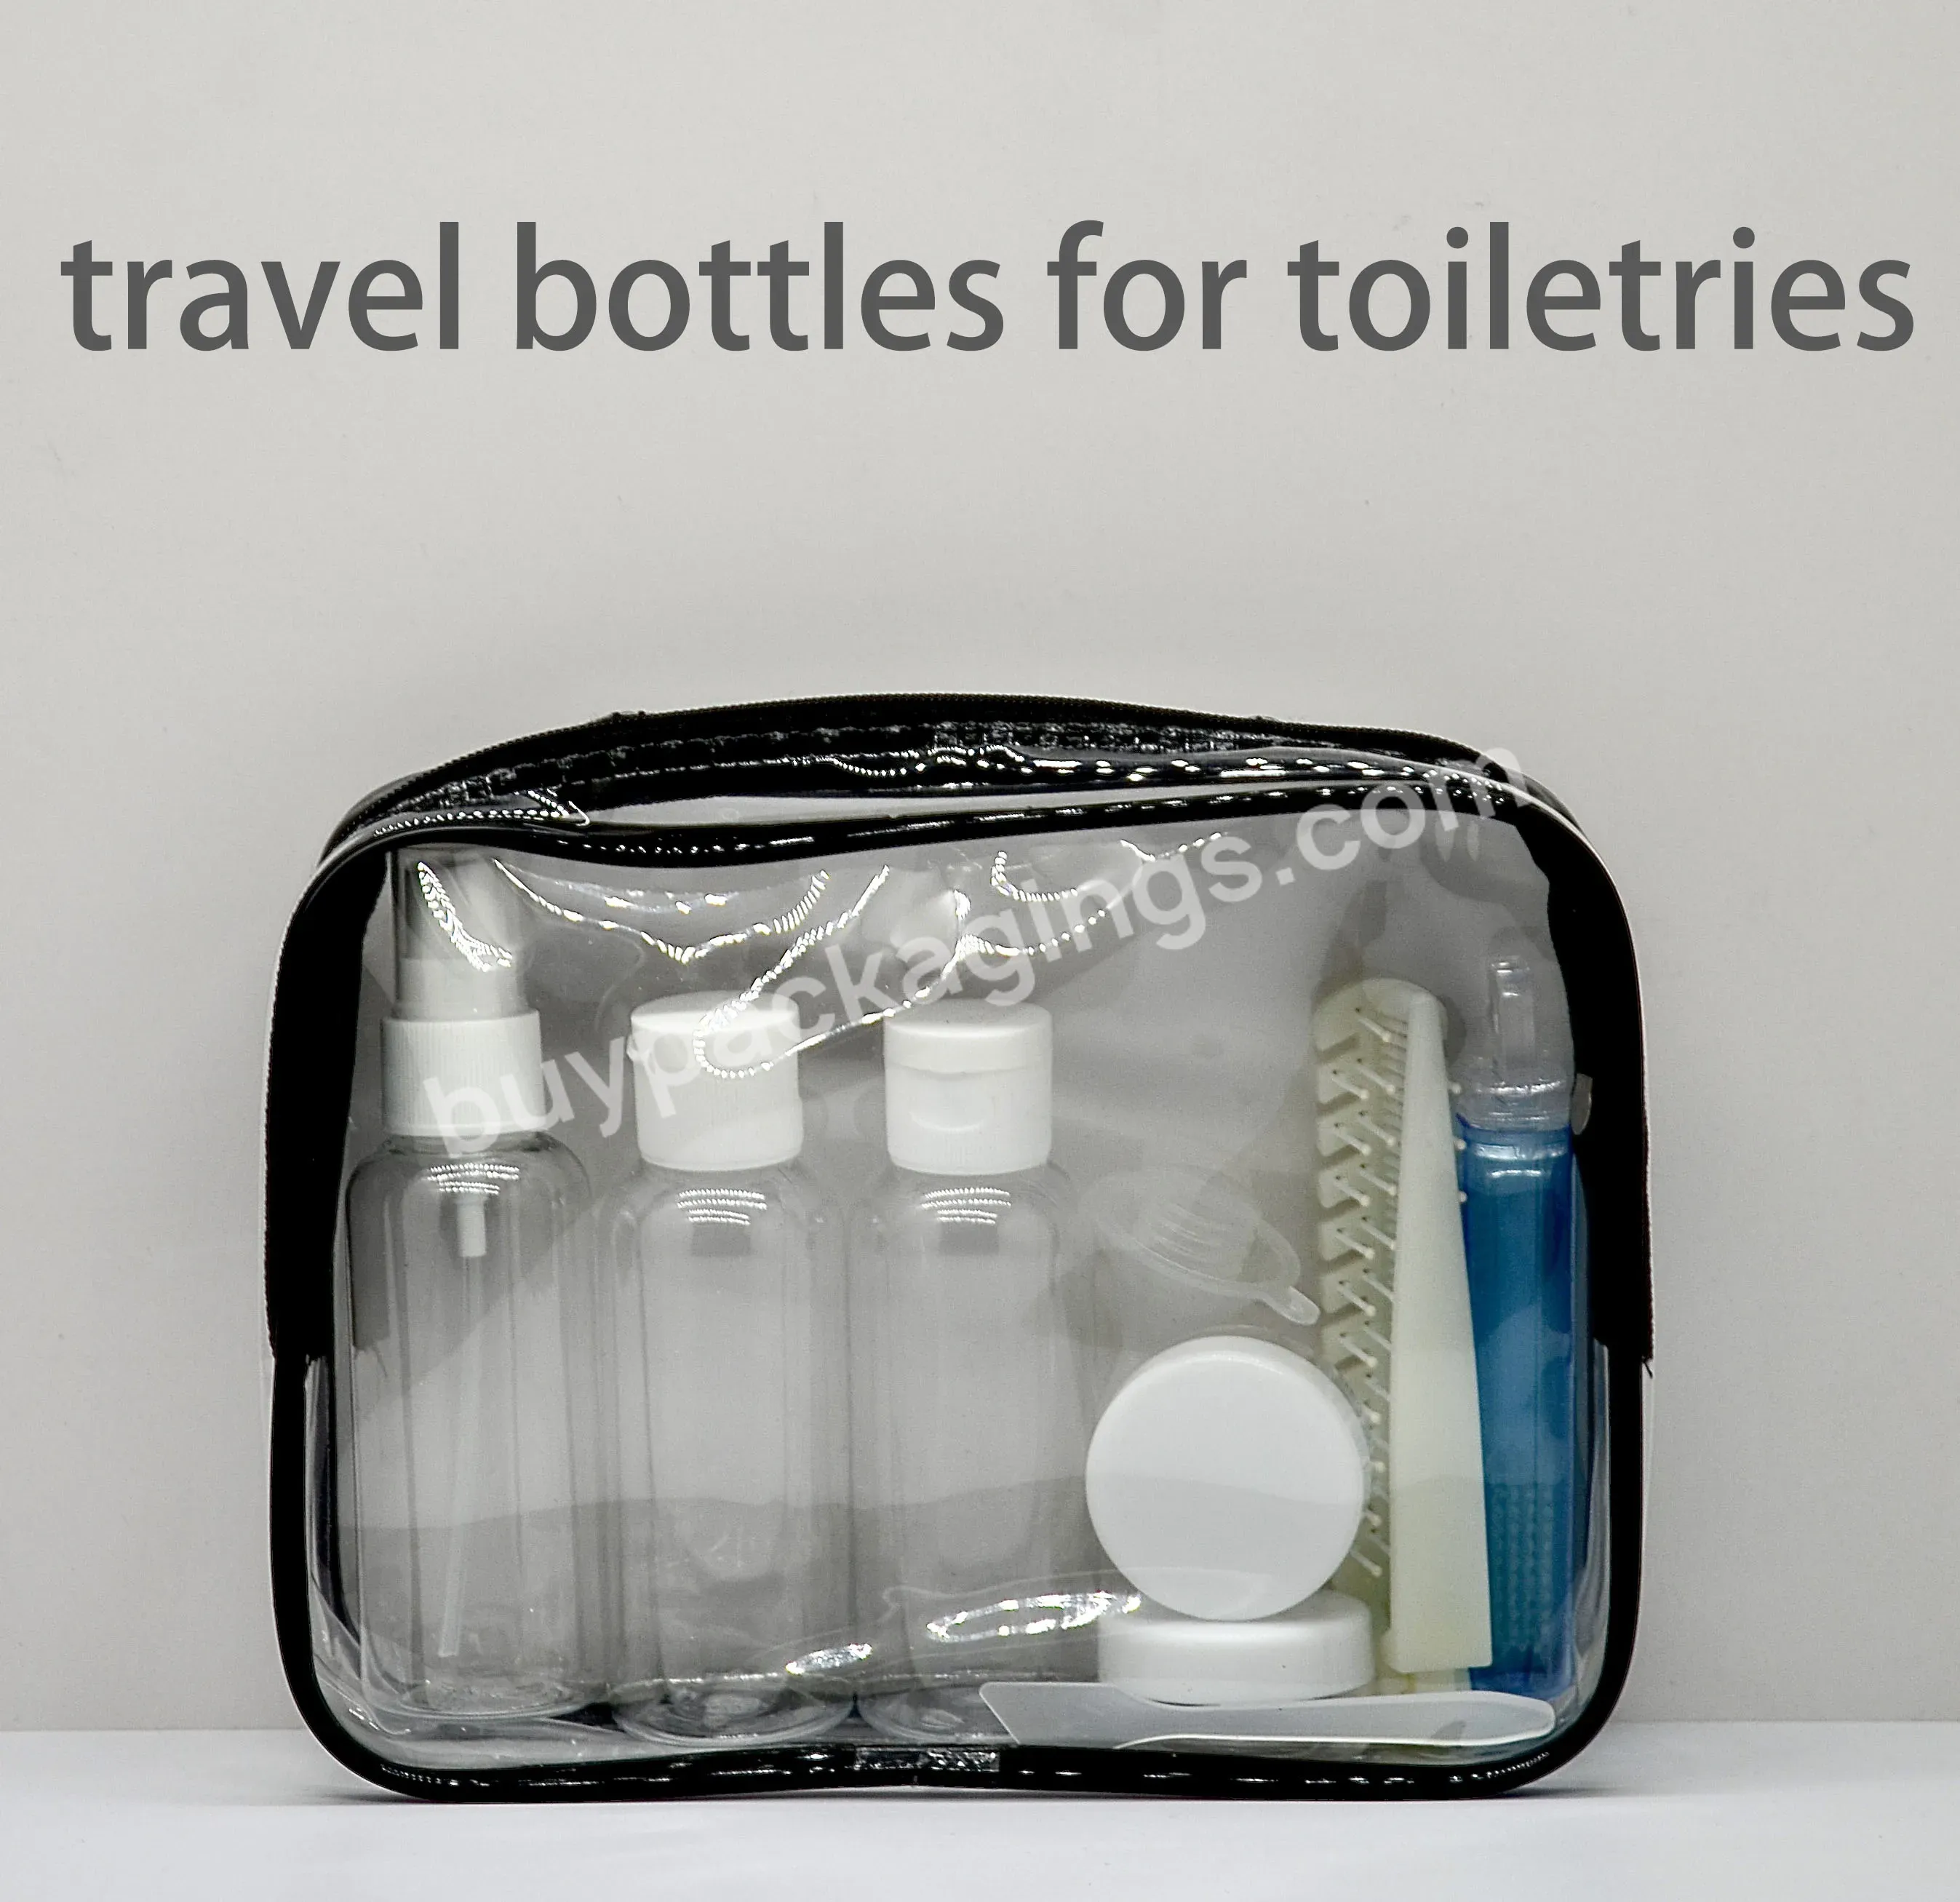 Leak-proof Toiletry Containers Cosmetic Travel Bottle Set Plastic Travel Bottles With Toothbrush And Comb - Buy Plastic Travel Bottles,Cosmetic Travel Bottle Kit,Travel Cosmetic Packing Bottle Set With Toothbrush And Comb.